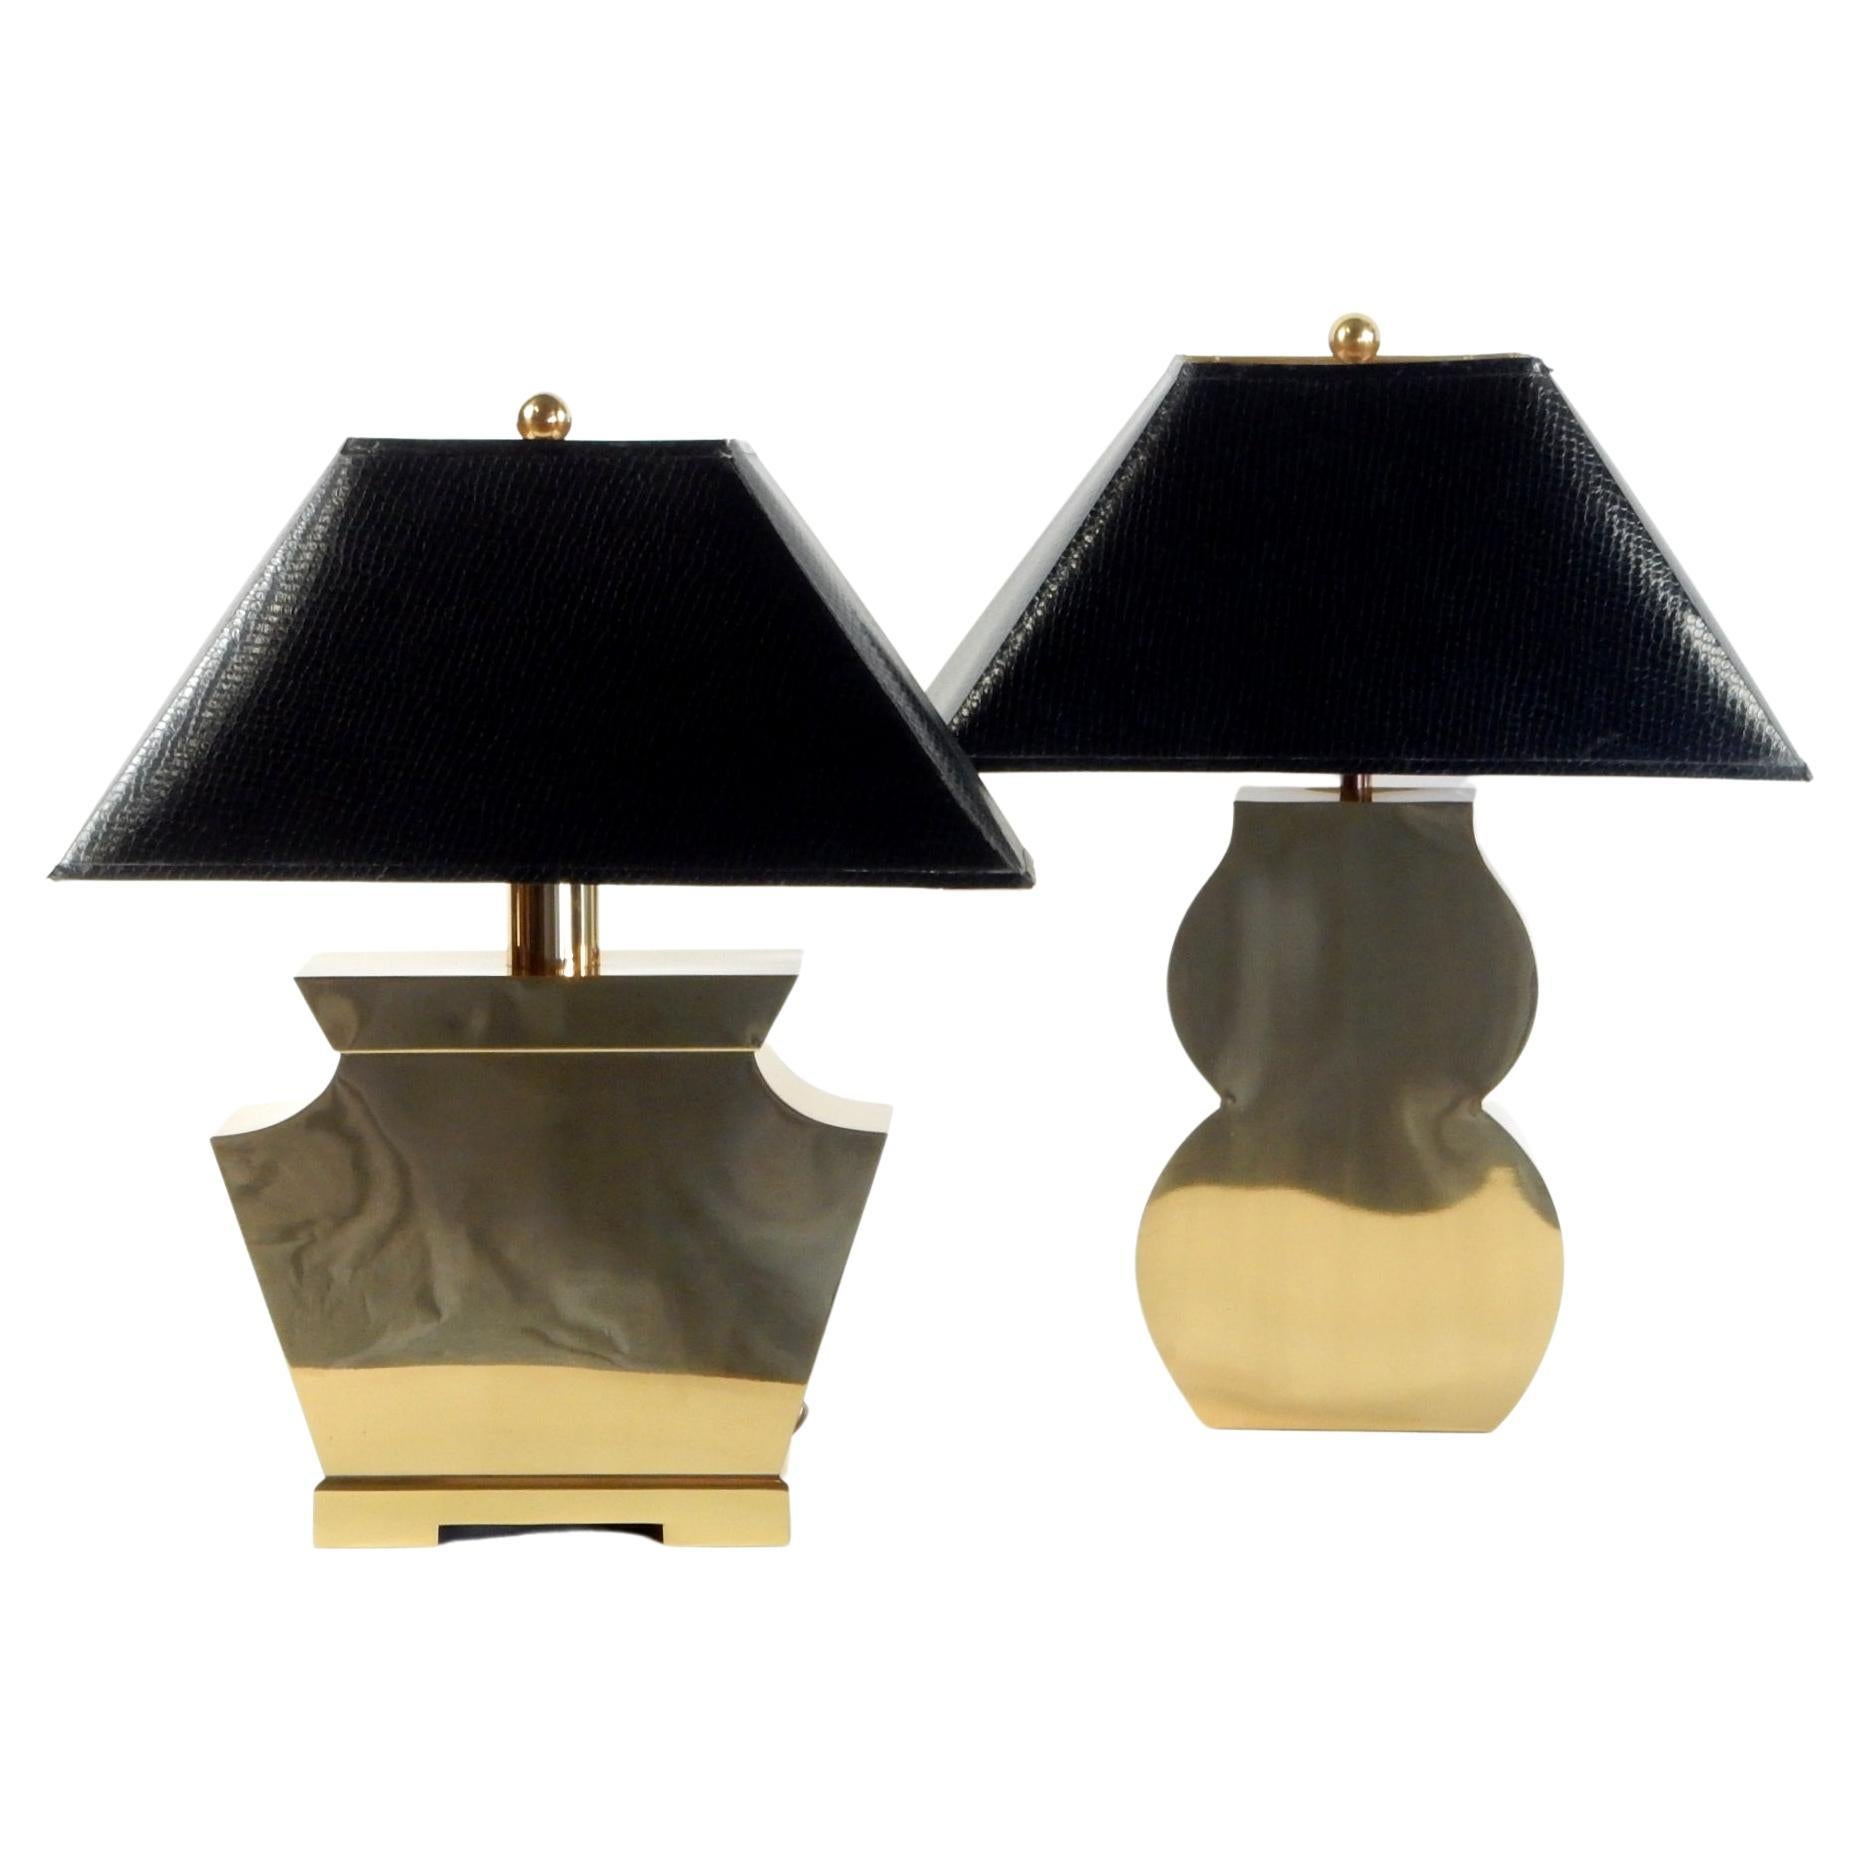 Post-Modern streamline table lamps constructed of polished brass. 
Original faux reptile skin covered shades with golden lining.
Different shapes that go well together. These are amazing lit reflecting
light and close objects.
Manufactured by